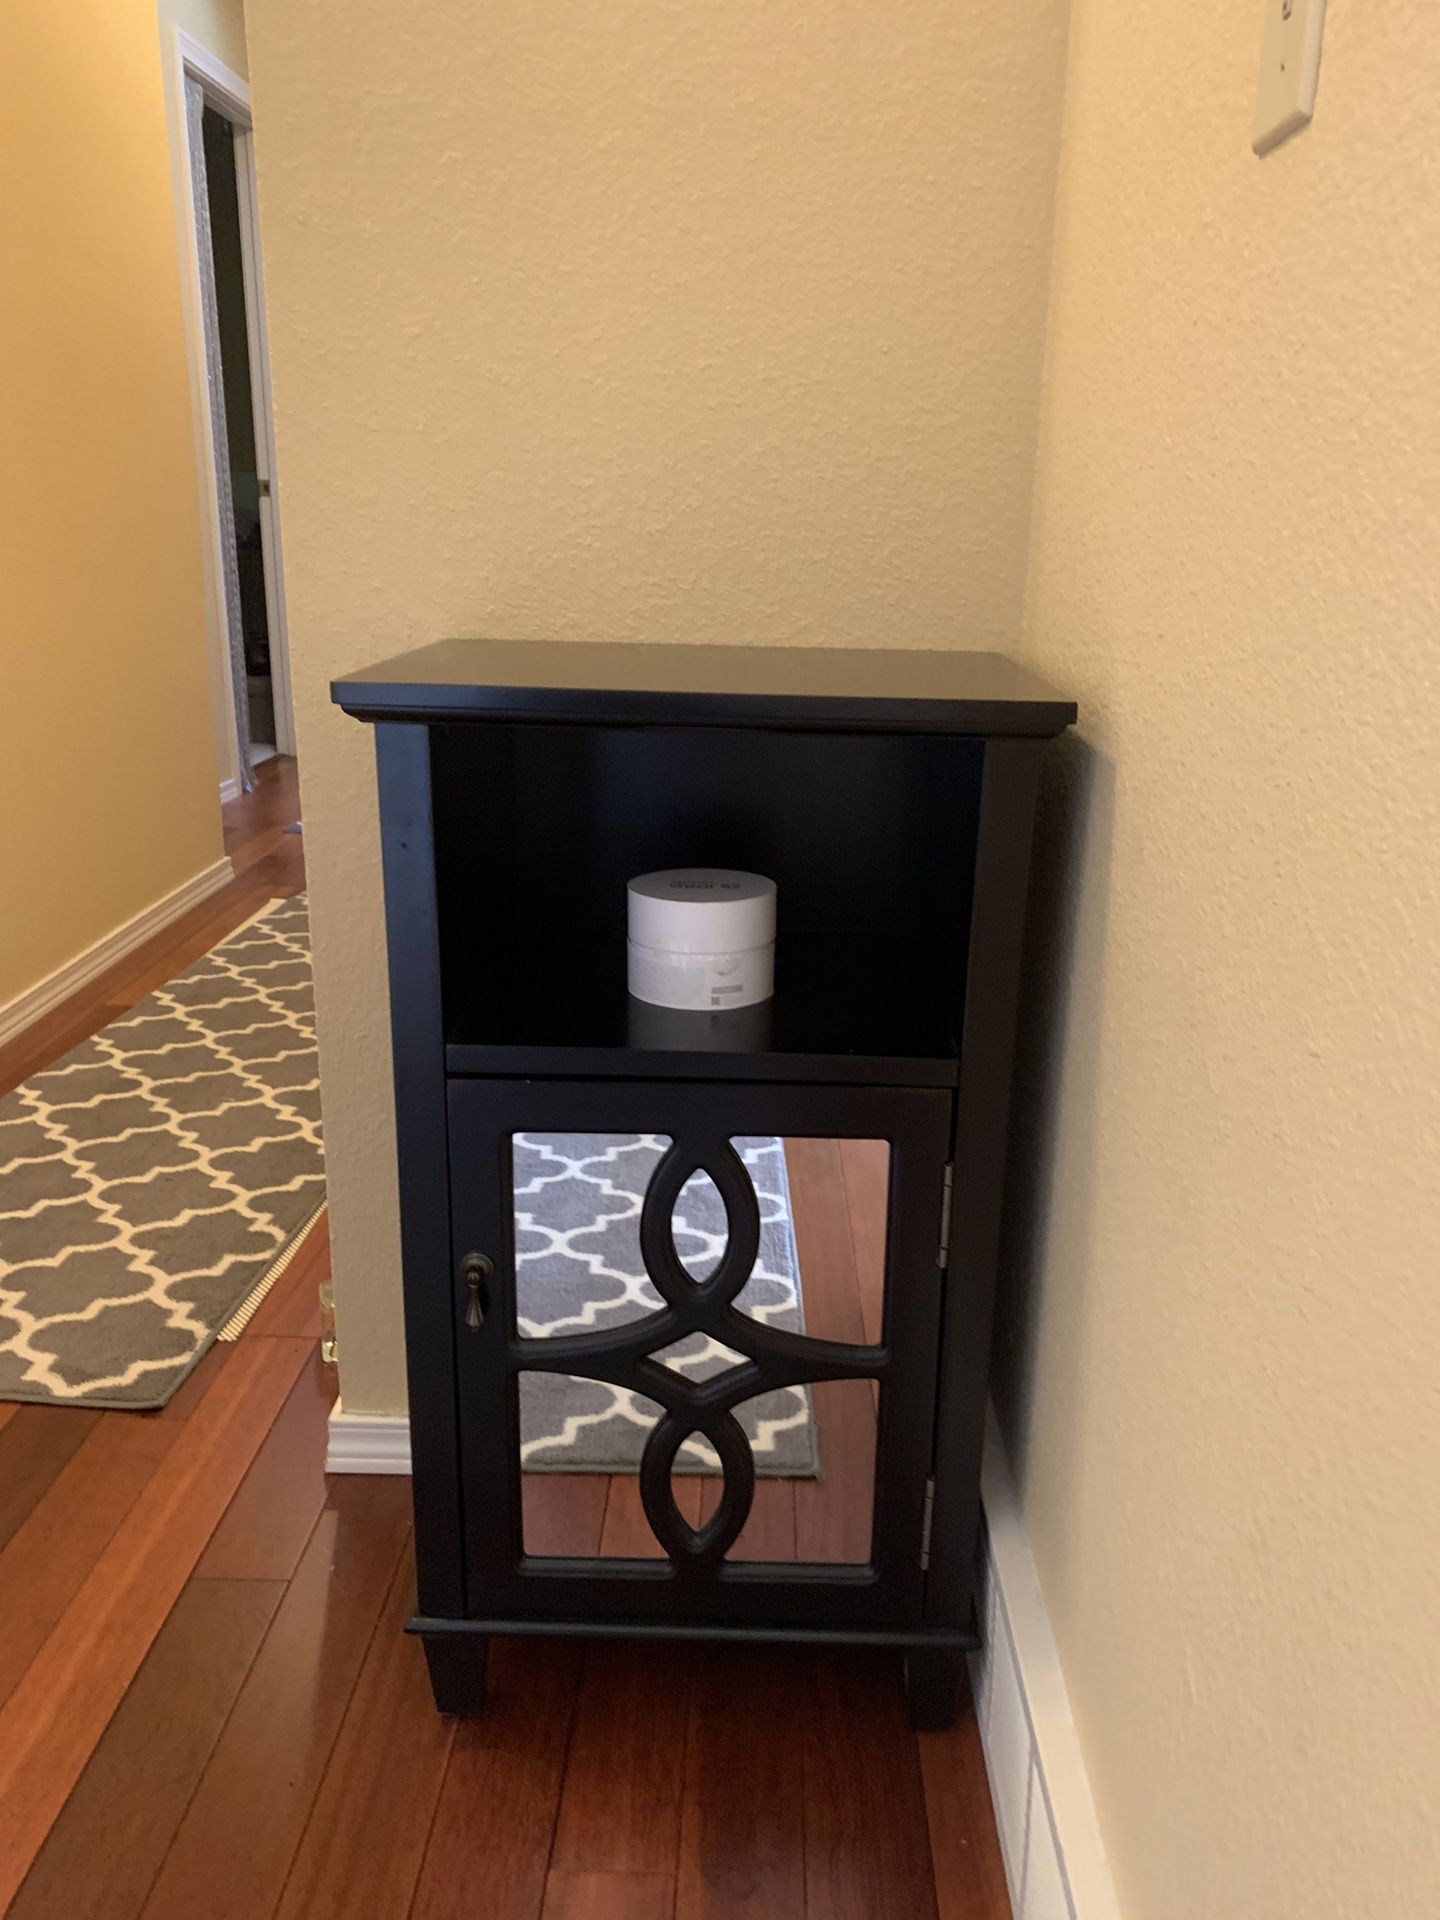 Small end table with mirrored cabinet door